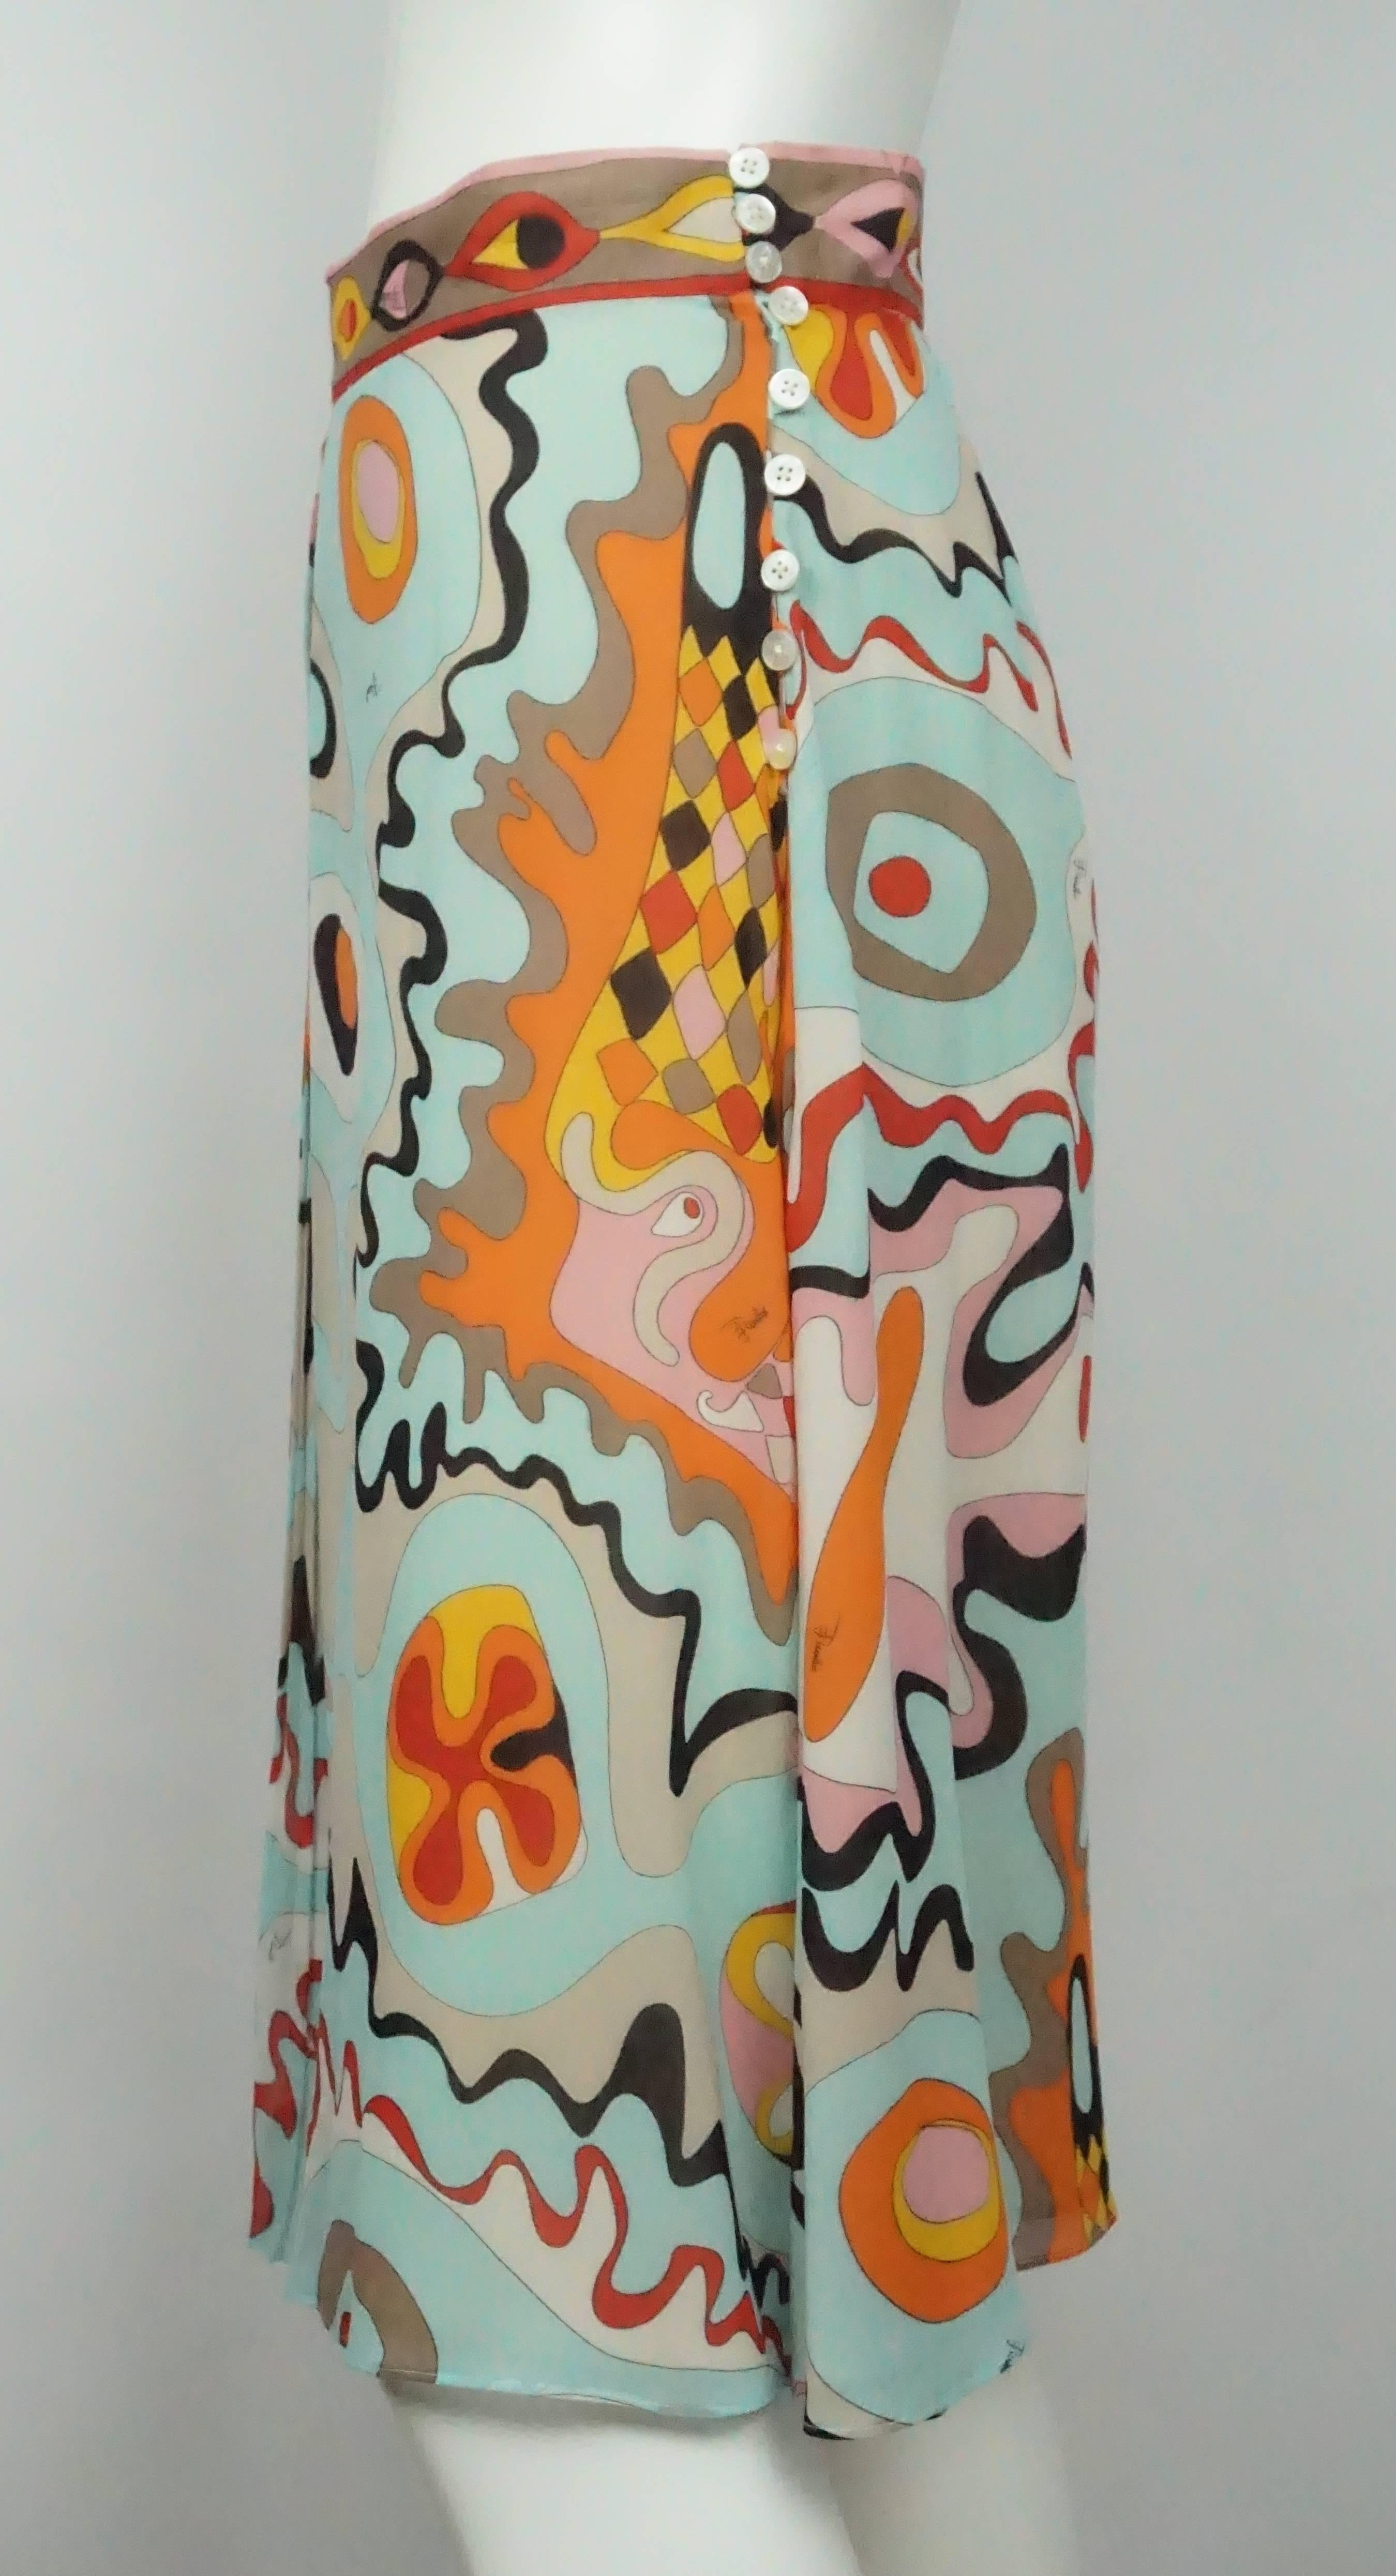 Emilio Pucci Multi Color Silk Chiffon Skirt - 12  This beautiful Silk Chiffon Print A Line Skirt is very colorful and feminine. It has a 1.75